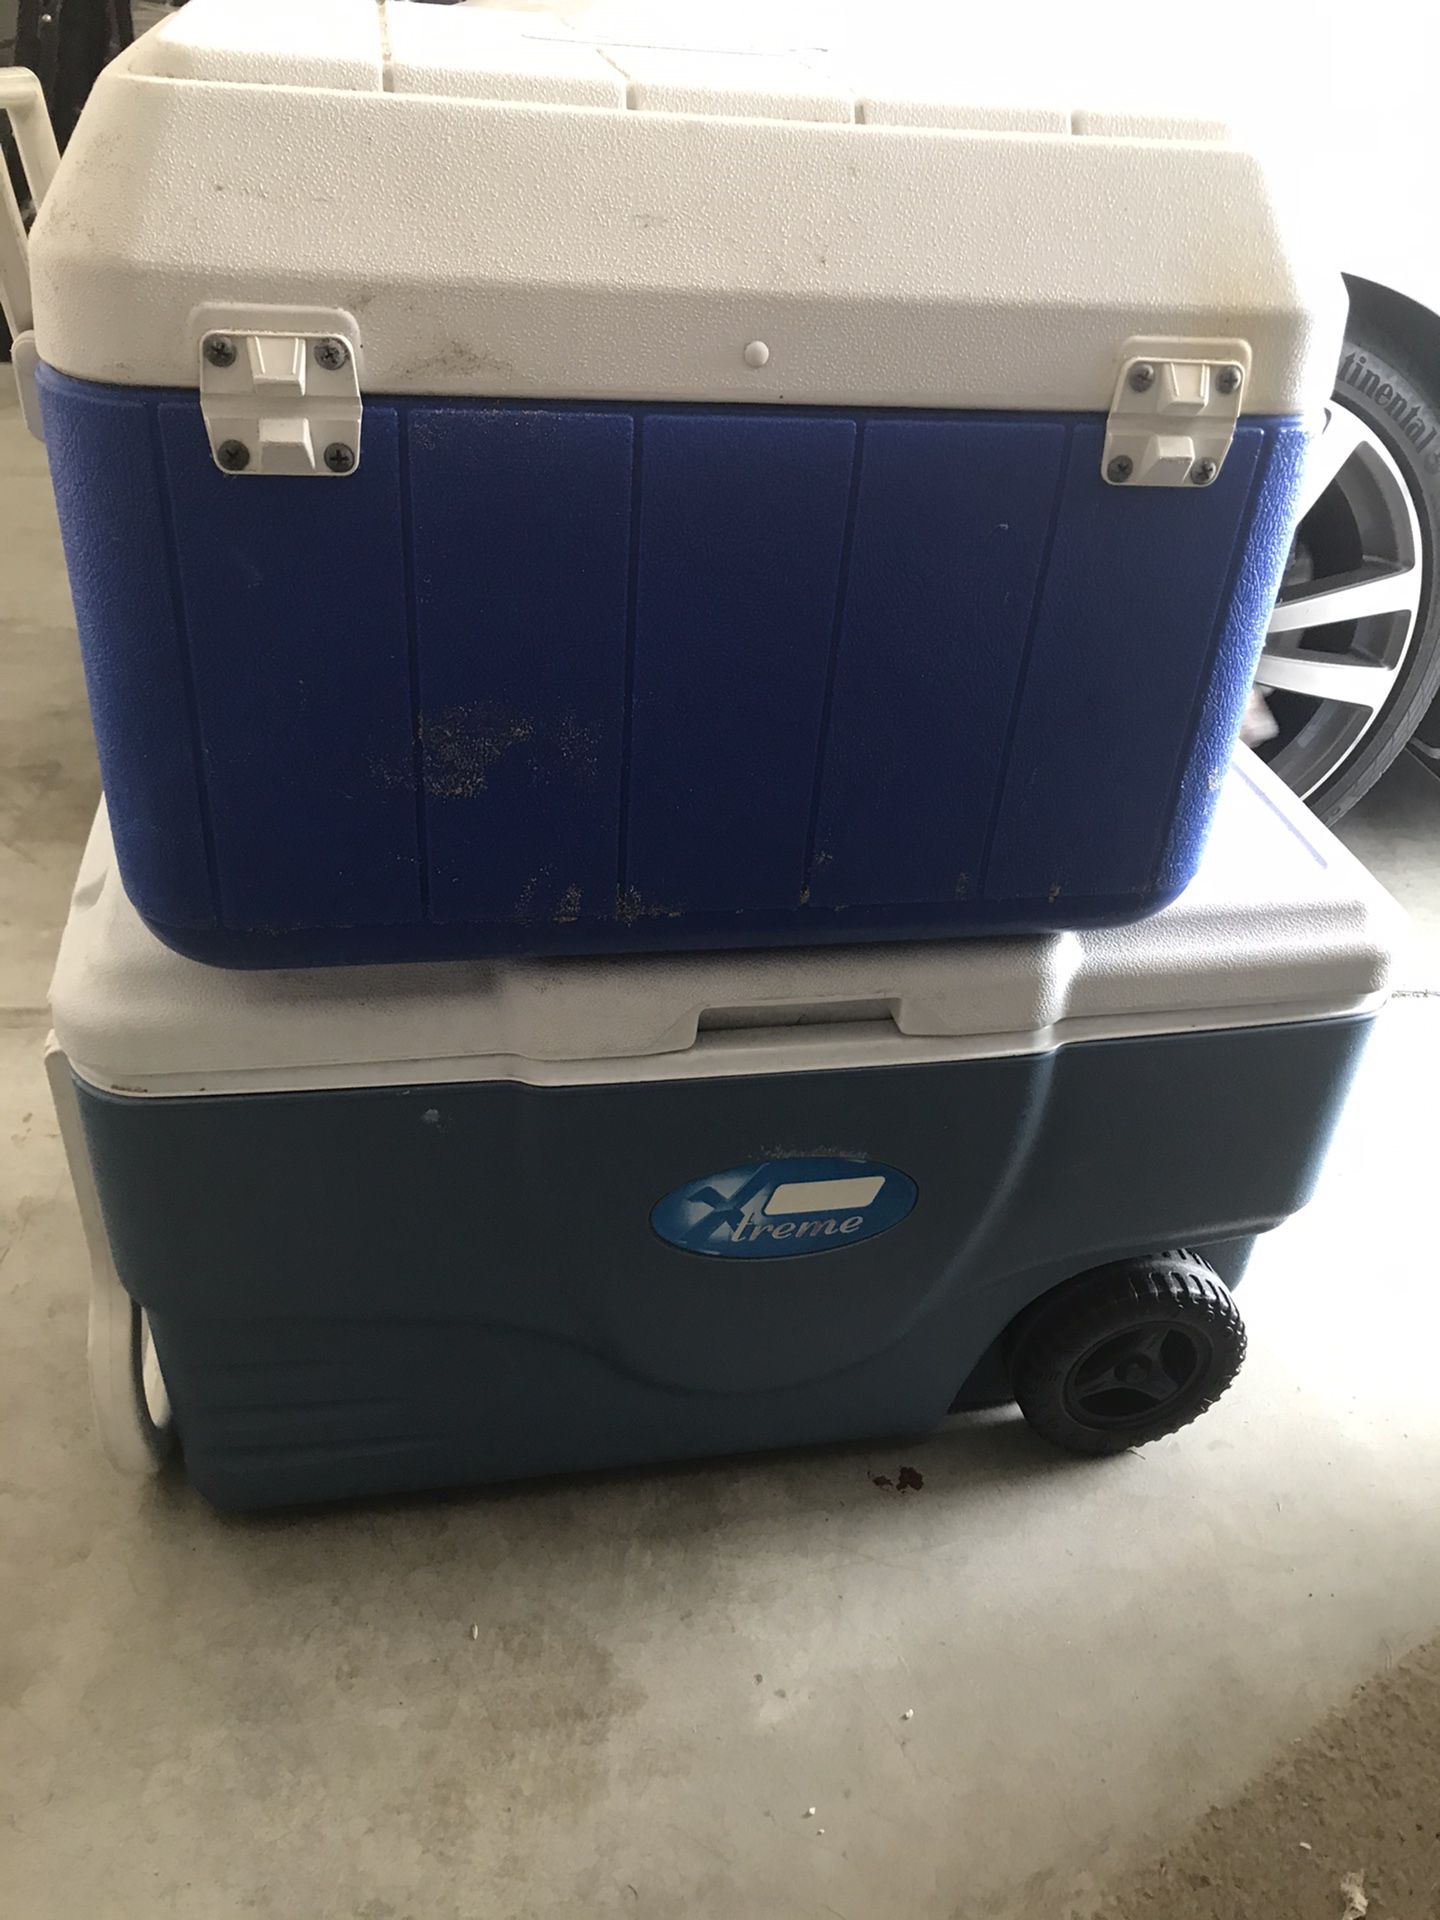 Free coolers